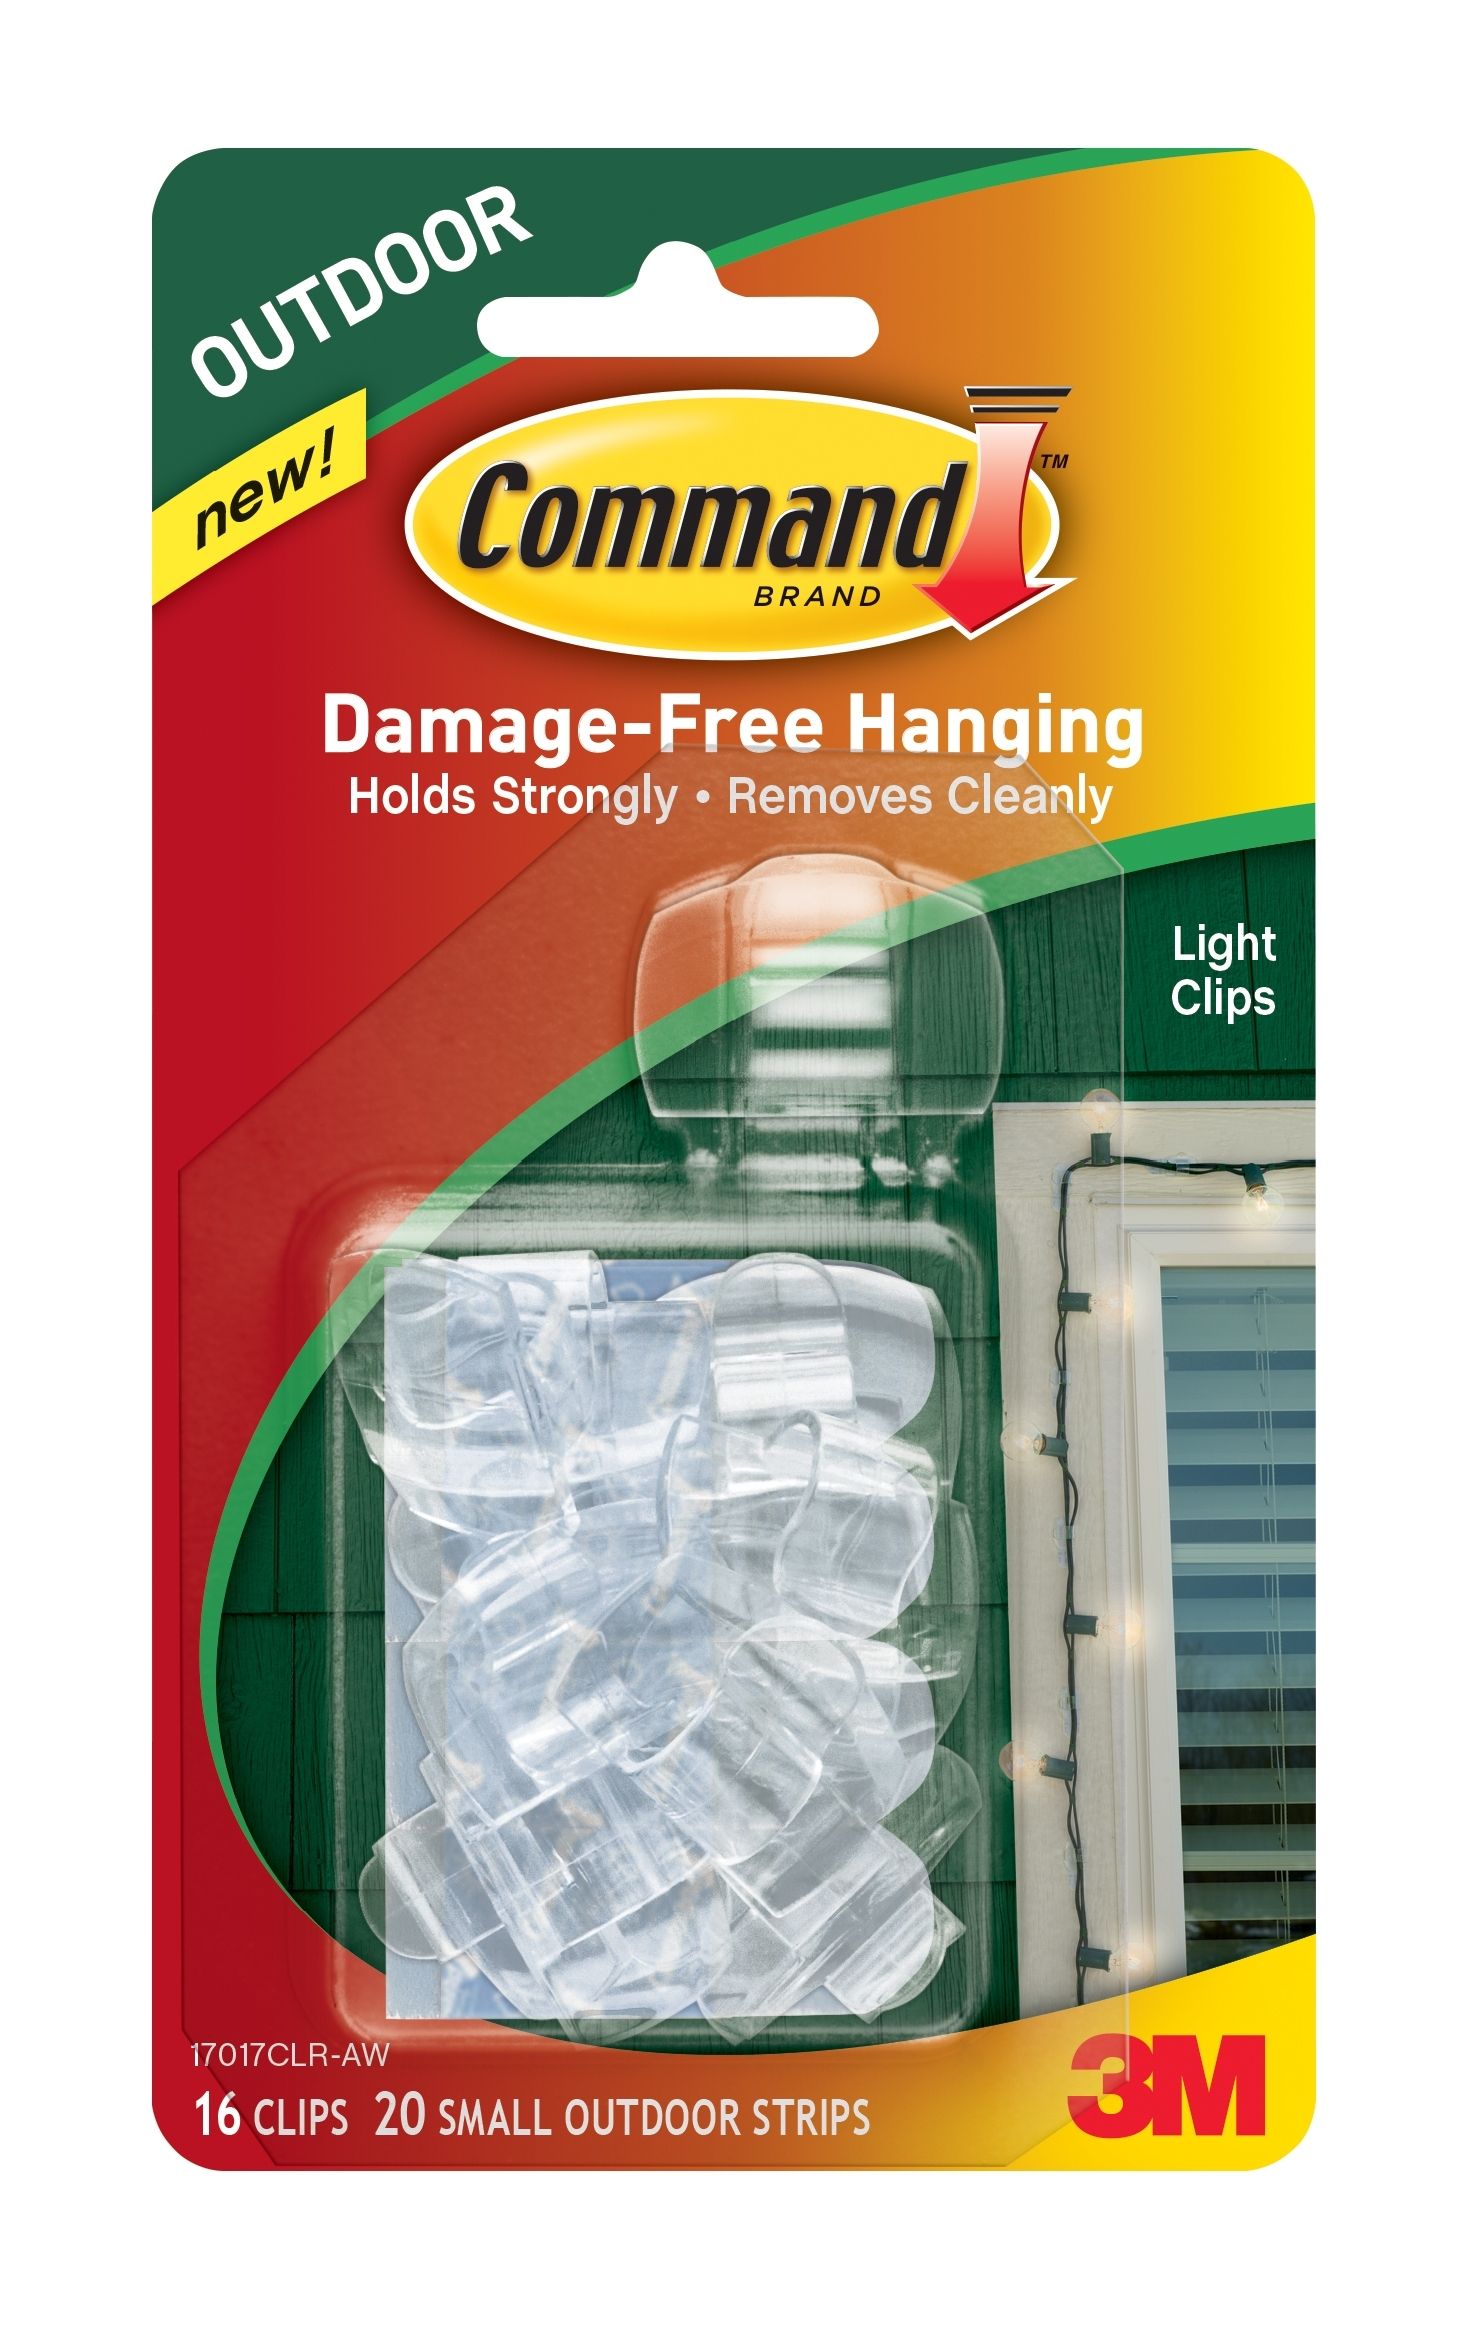 3m Introduces New Command Outdoor Decorating Products | Business Wire Inside Hanging Outdoor Christmas Lights Without Nails (View 12 of 15)